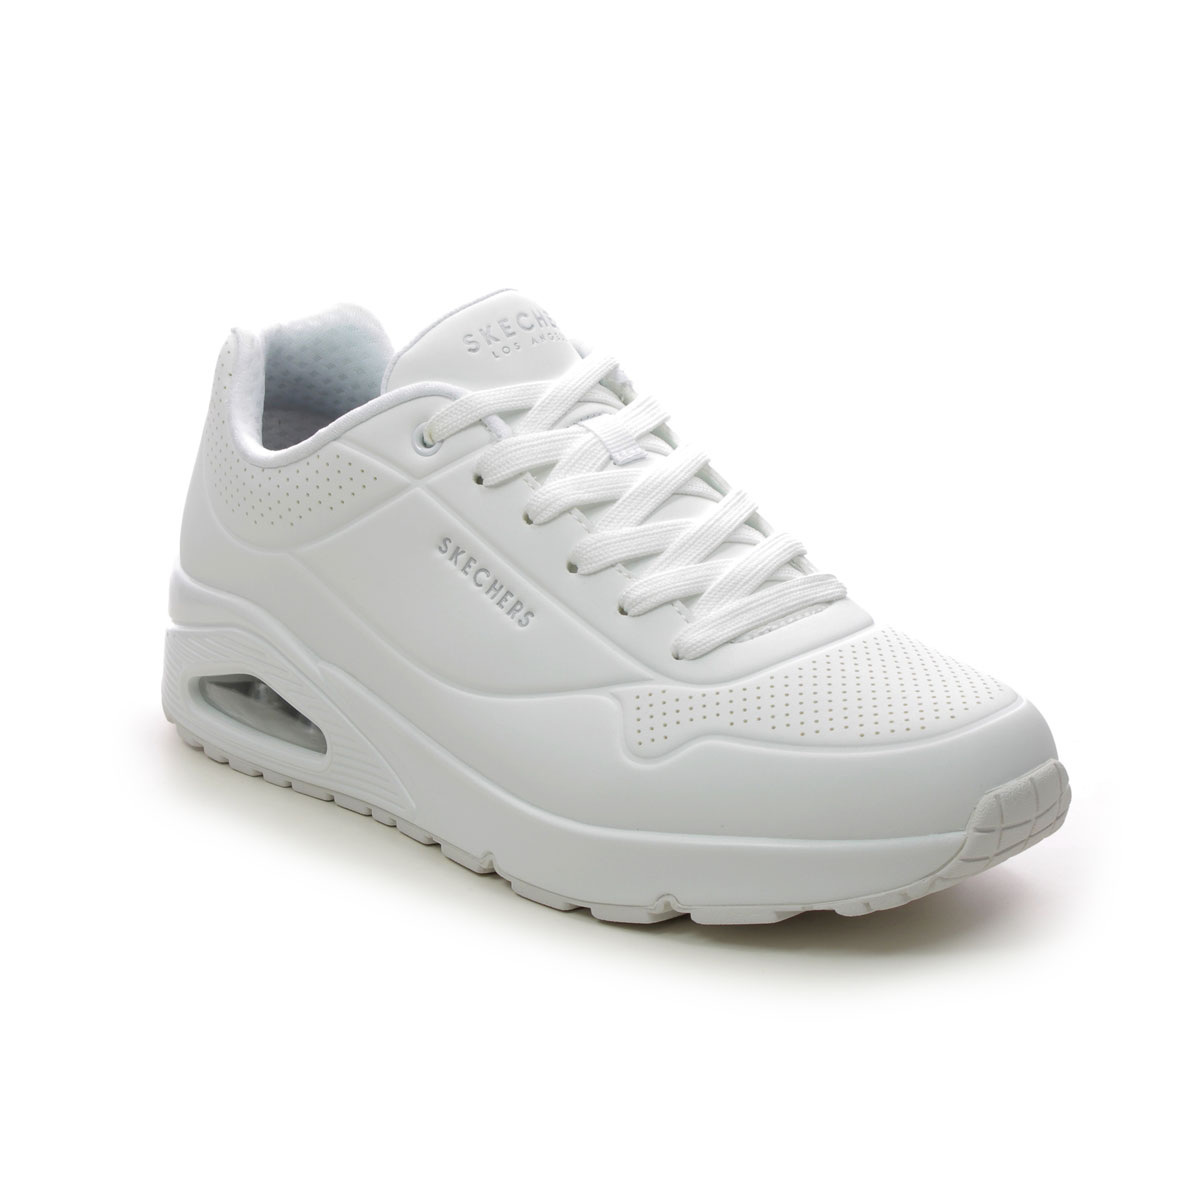 Skechers Uno Mens W White Mens trainers 52458 in a Plain Man-made in Size 7